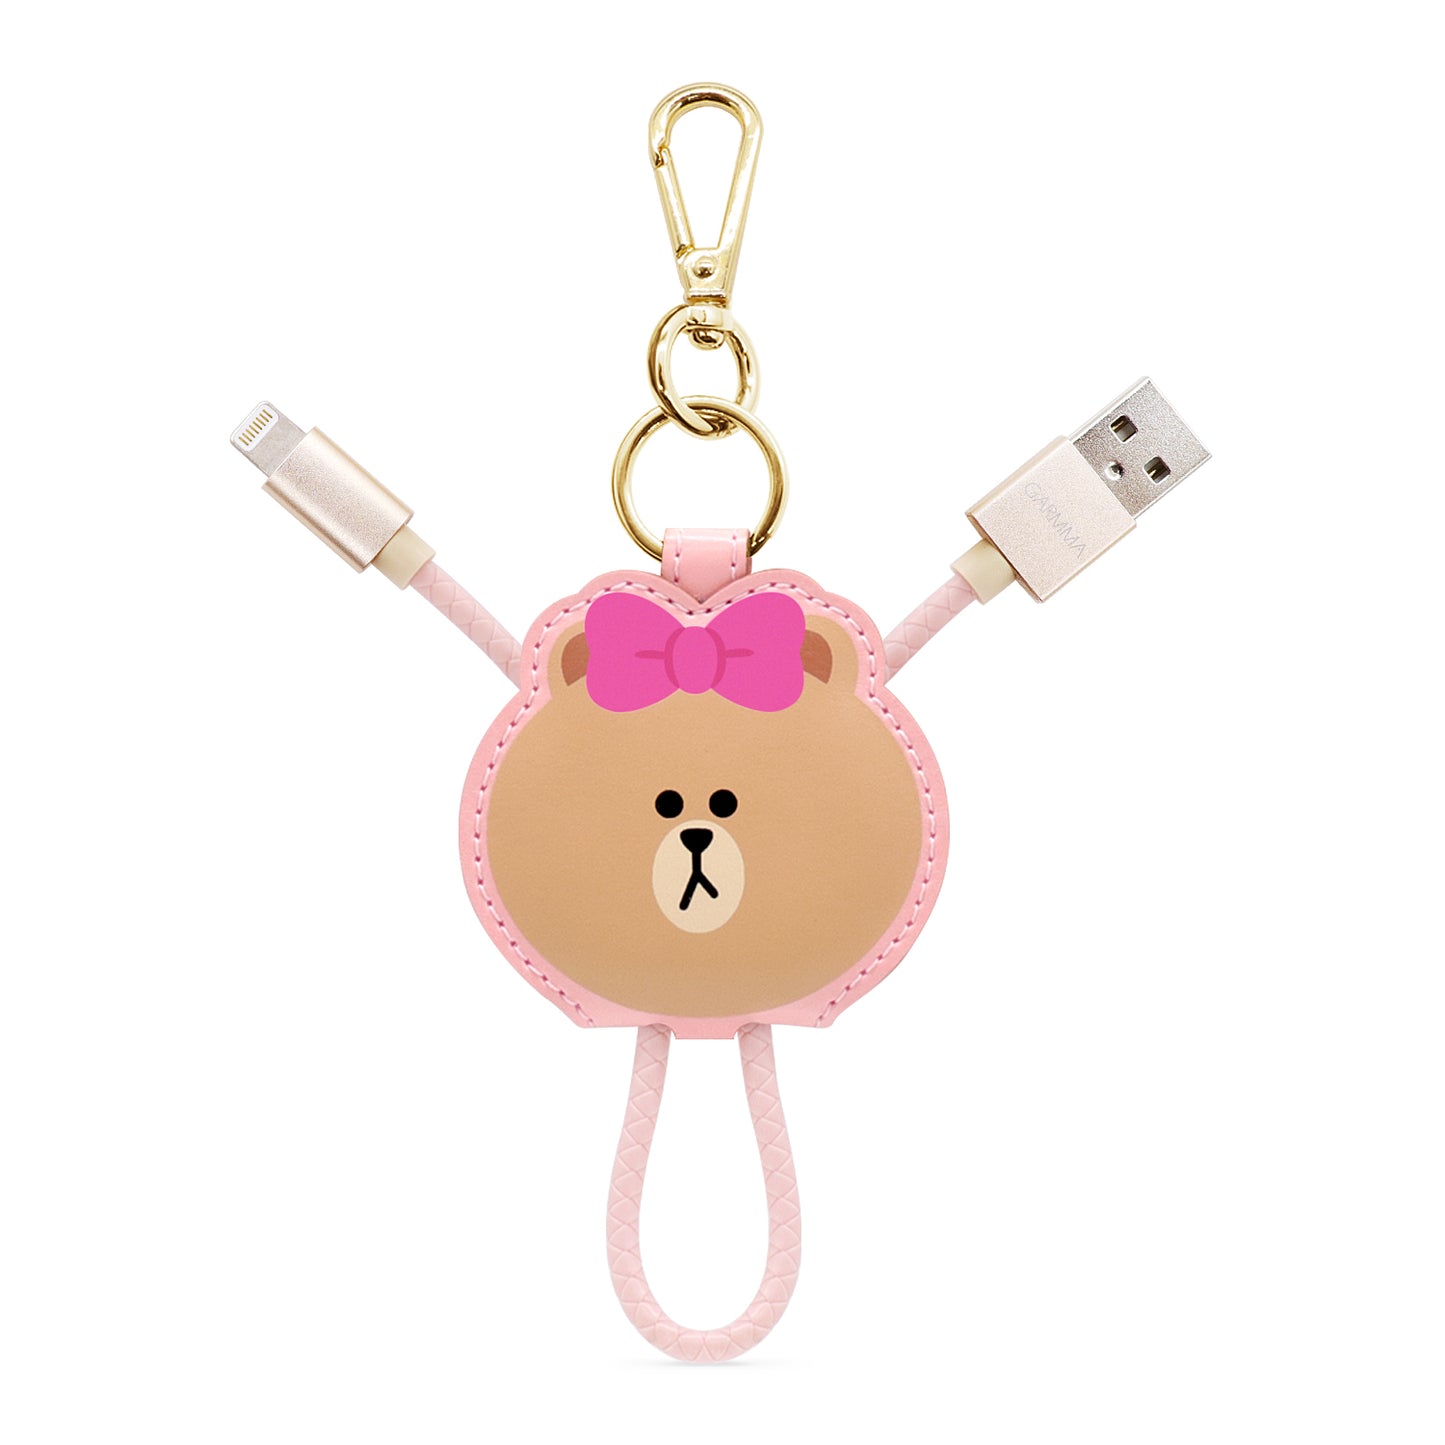 GARMMA Line Friends Apple MFI Certified Key Chain Leather USB Lightning Cable